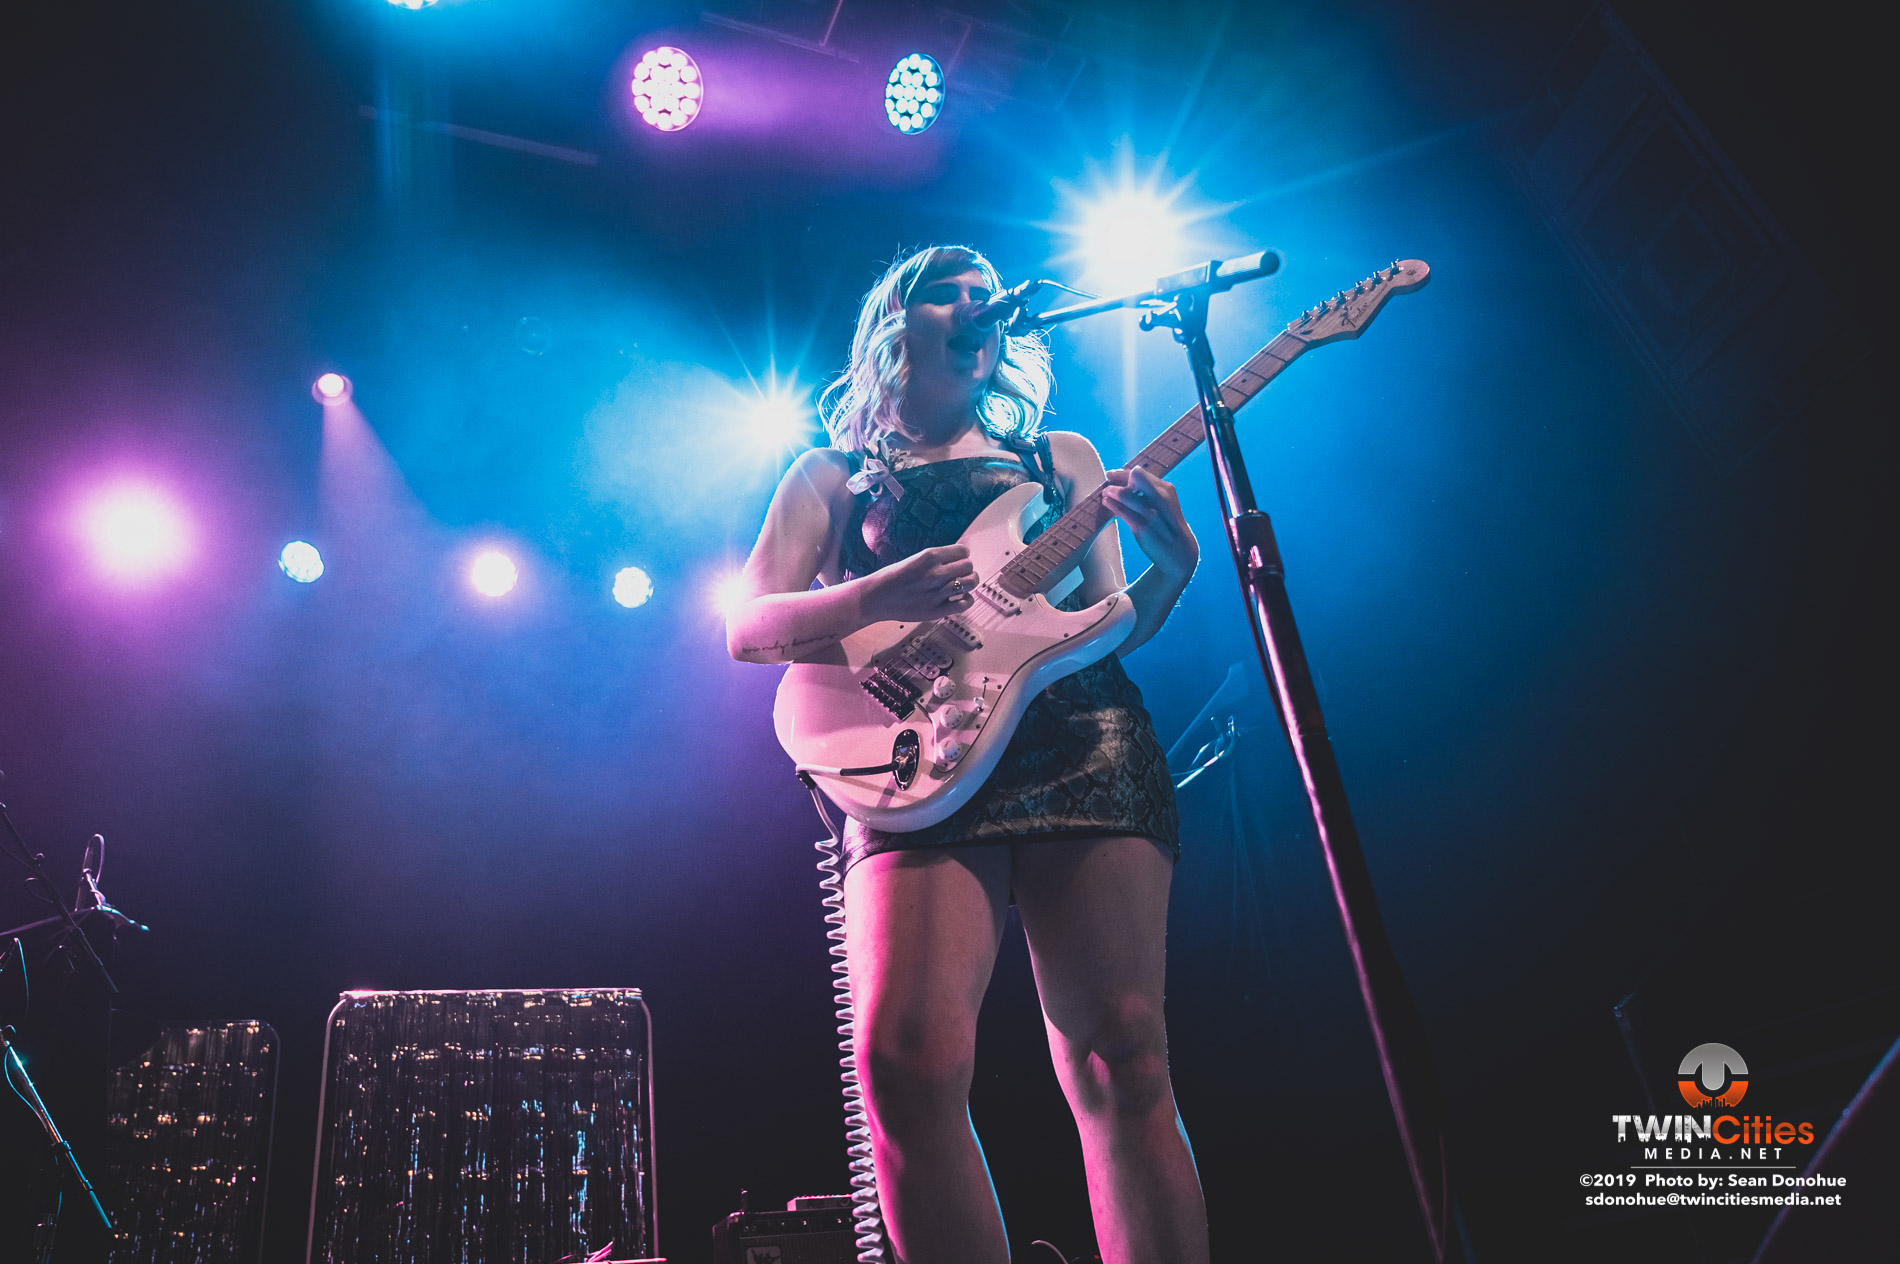 Bad Bad Hats, Ratrboys and Last Imort at First Ave | 12.21.2019